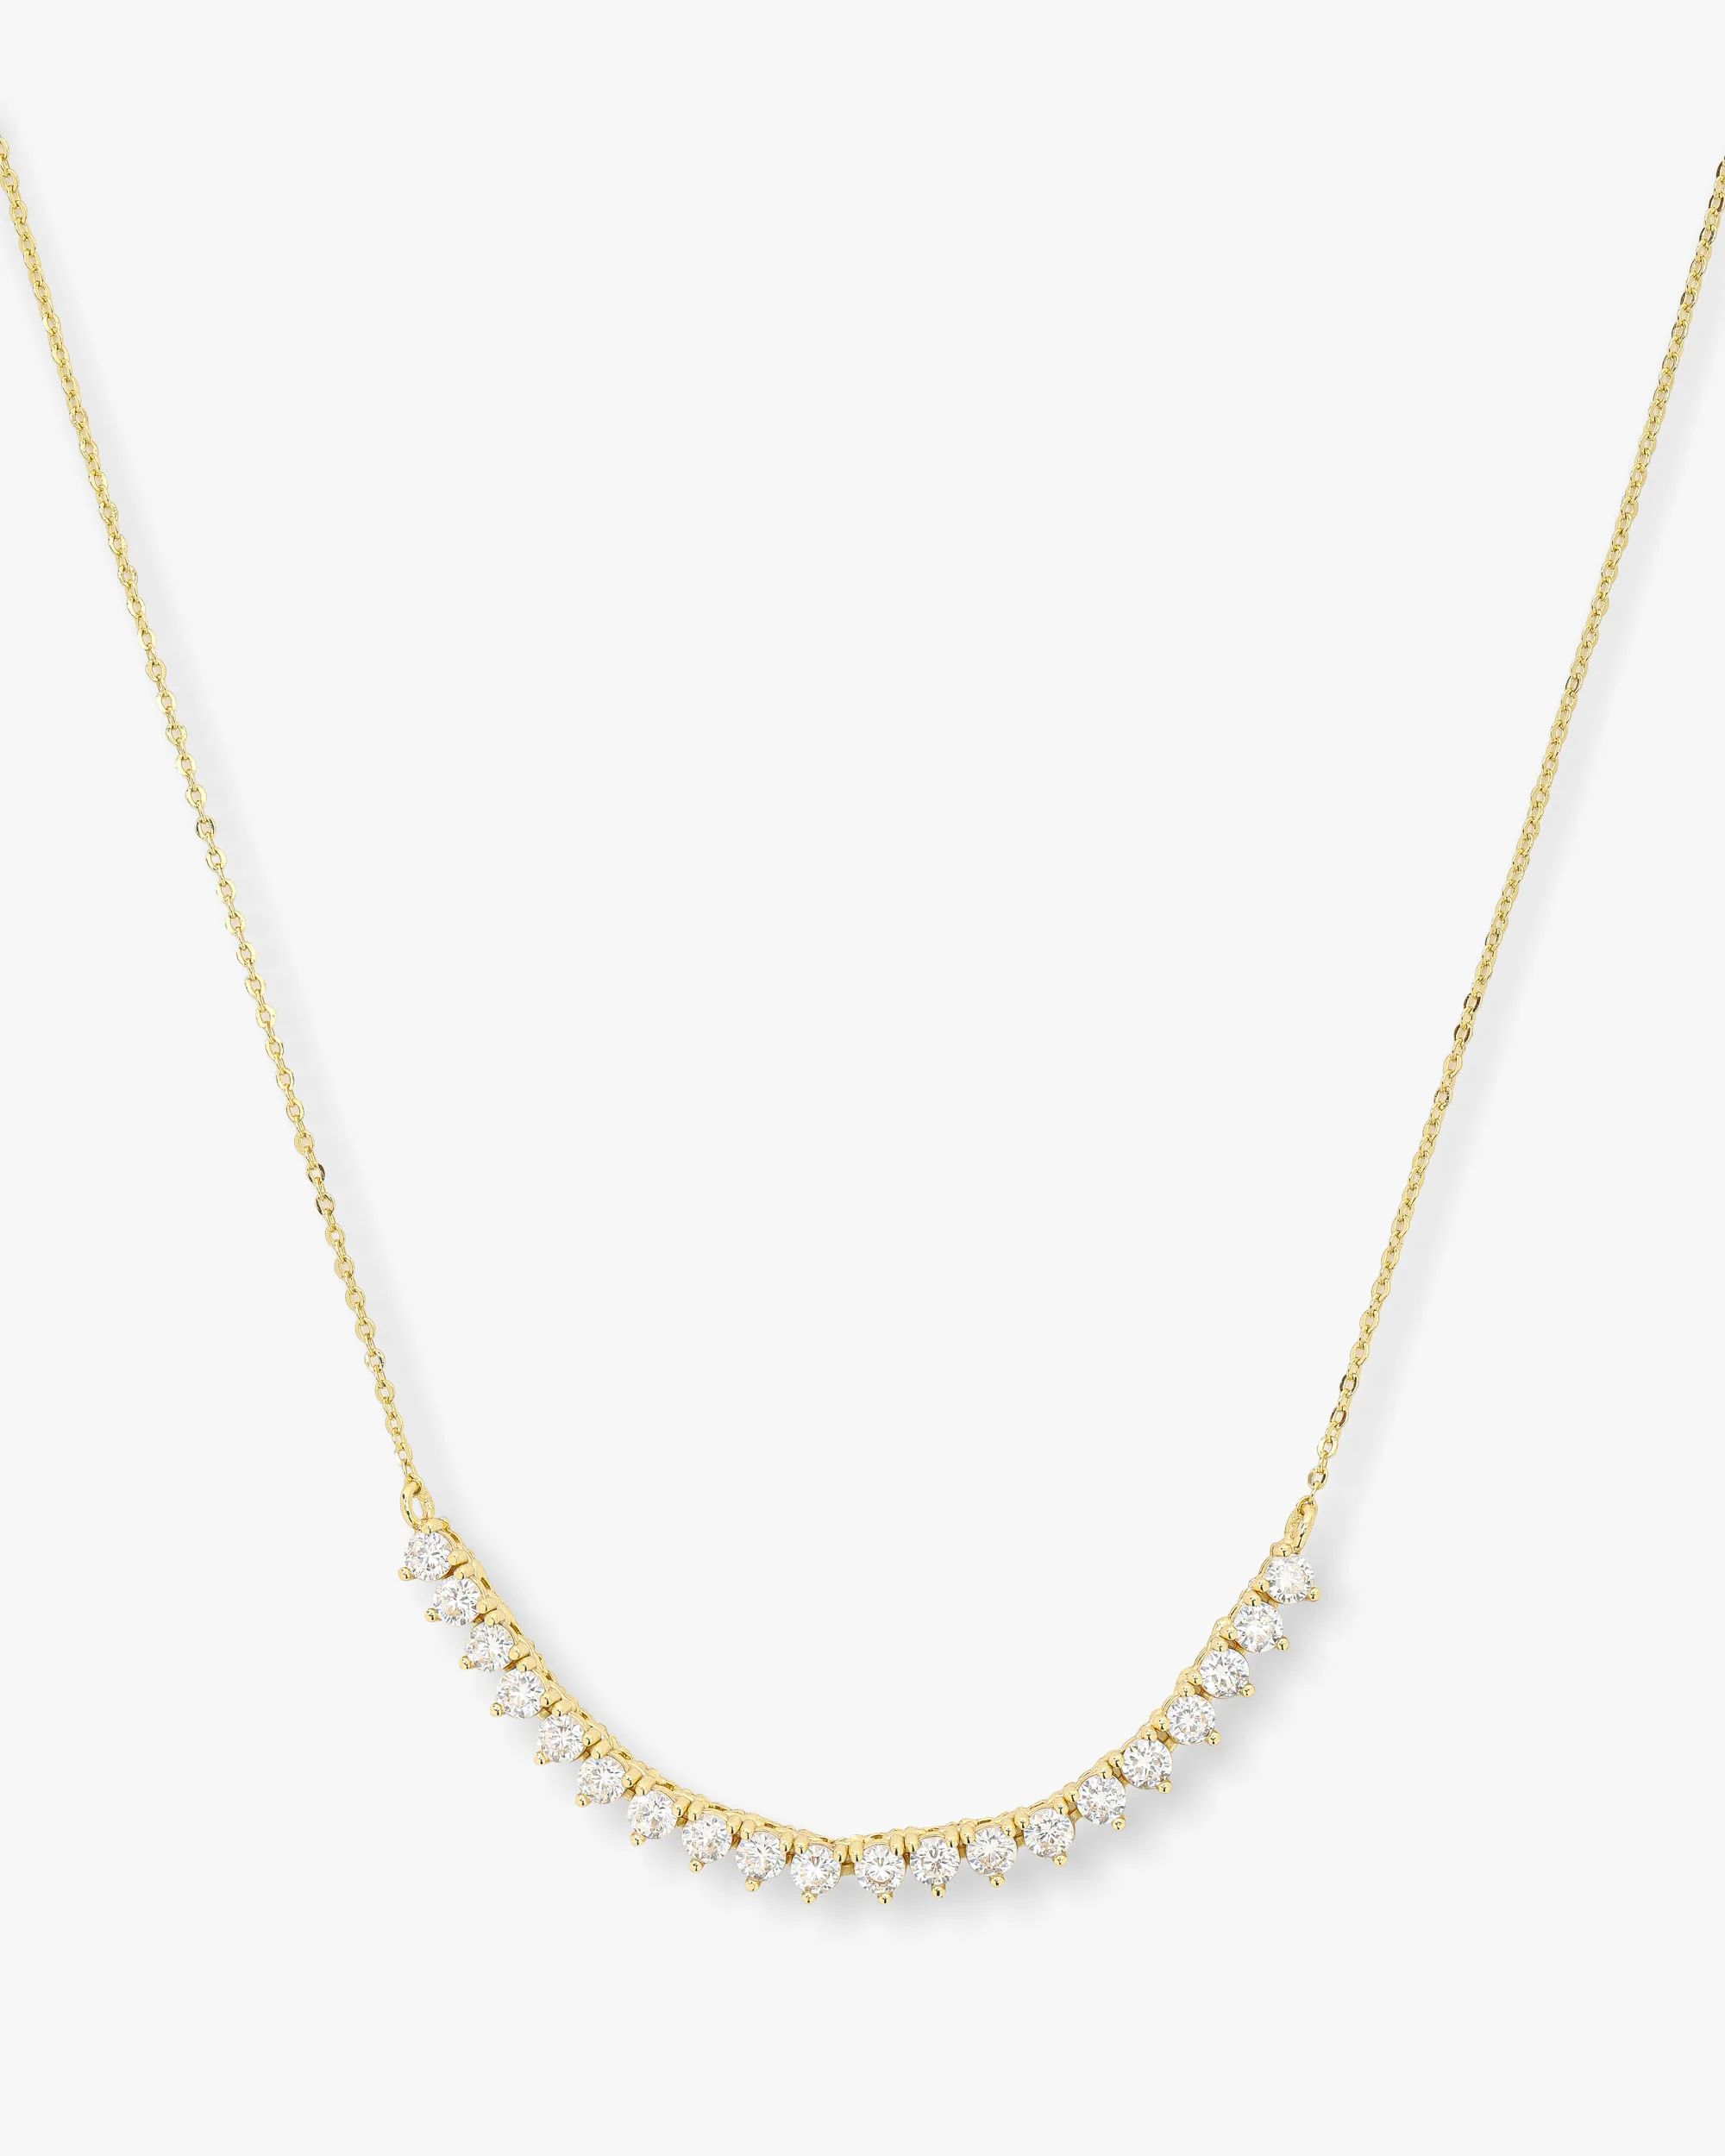 Not Your Basic Tennis Chain Necklace | Melinda Maria